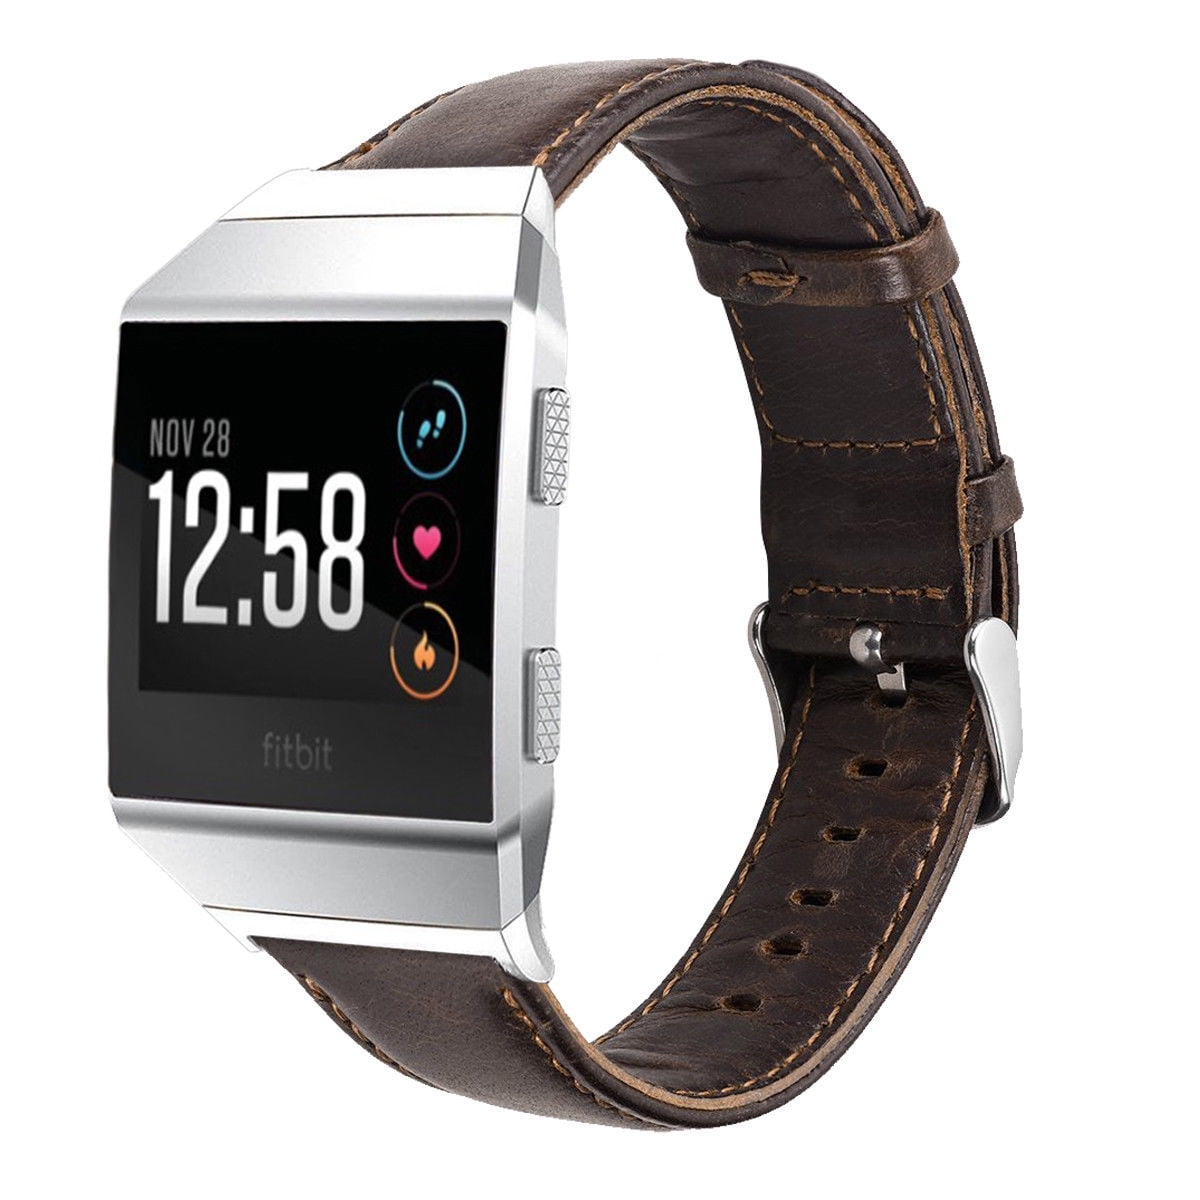 Fitbit Ionic Watch Bands, Mignova Genuine Leather Wristband Bracelet Watch Band Strap with Steel Buckle Clasp for Fitbit Ionic Fitness Watch (Light Brown) - Walmart.com